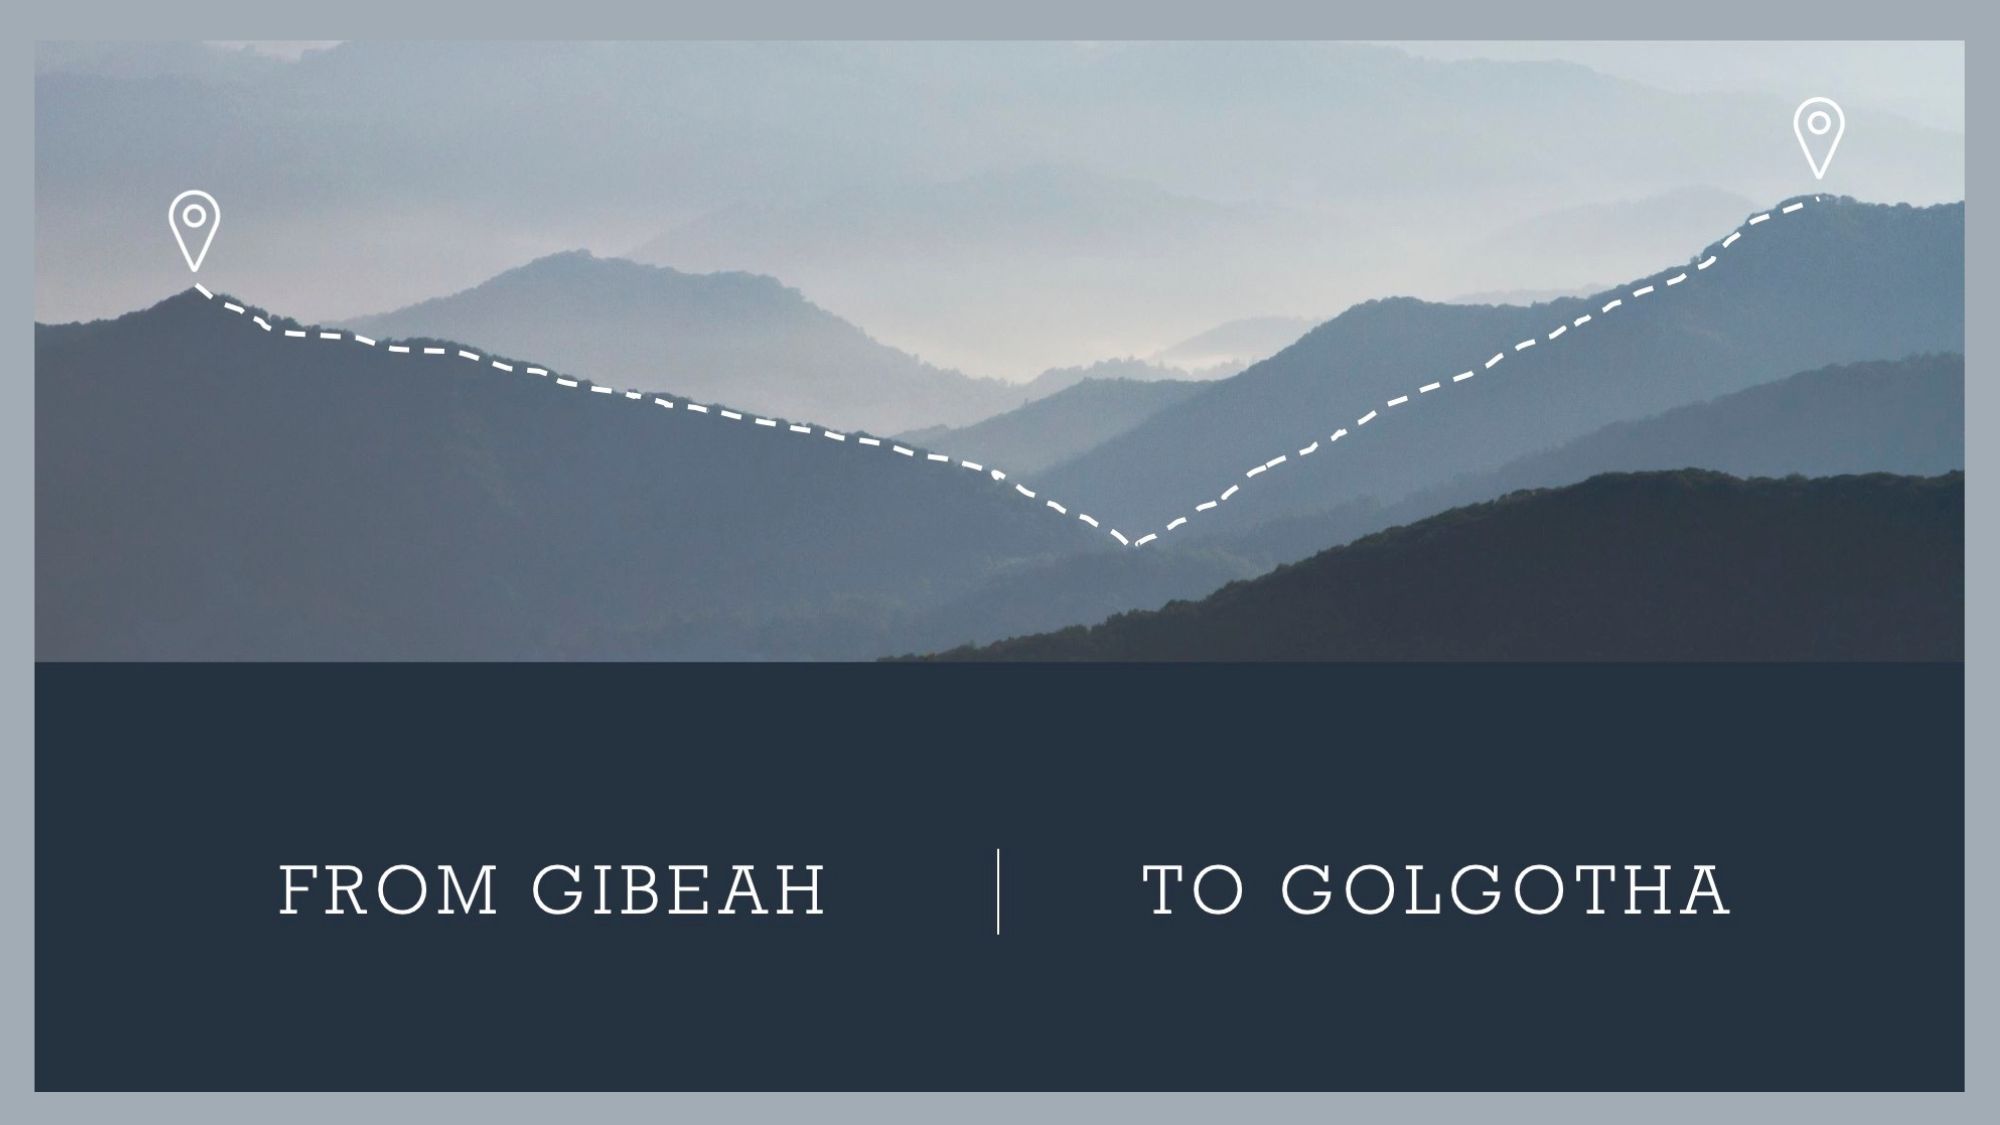 From Gibeah to Golgotha